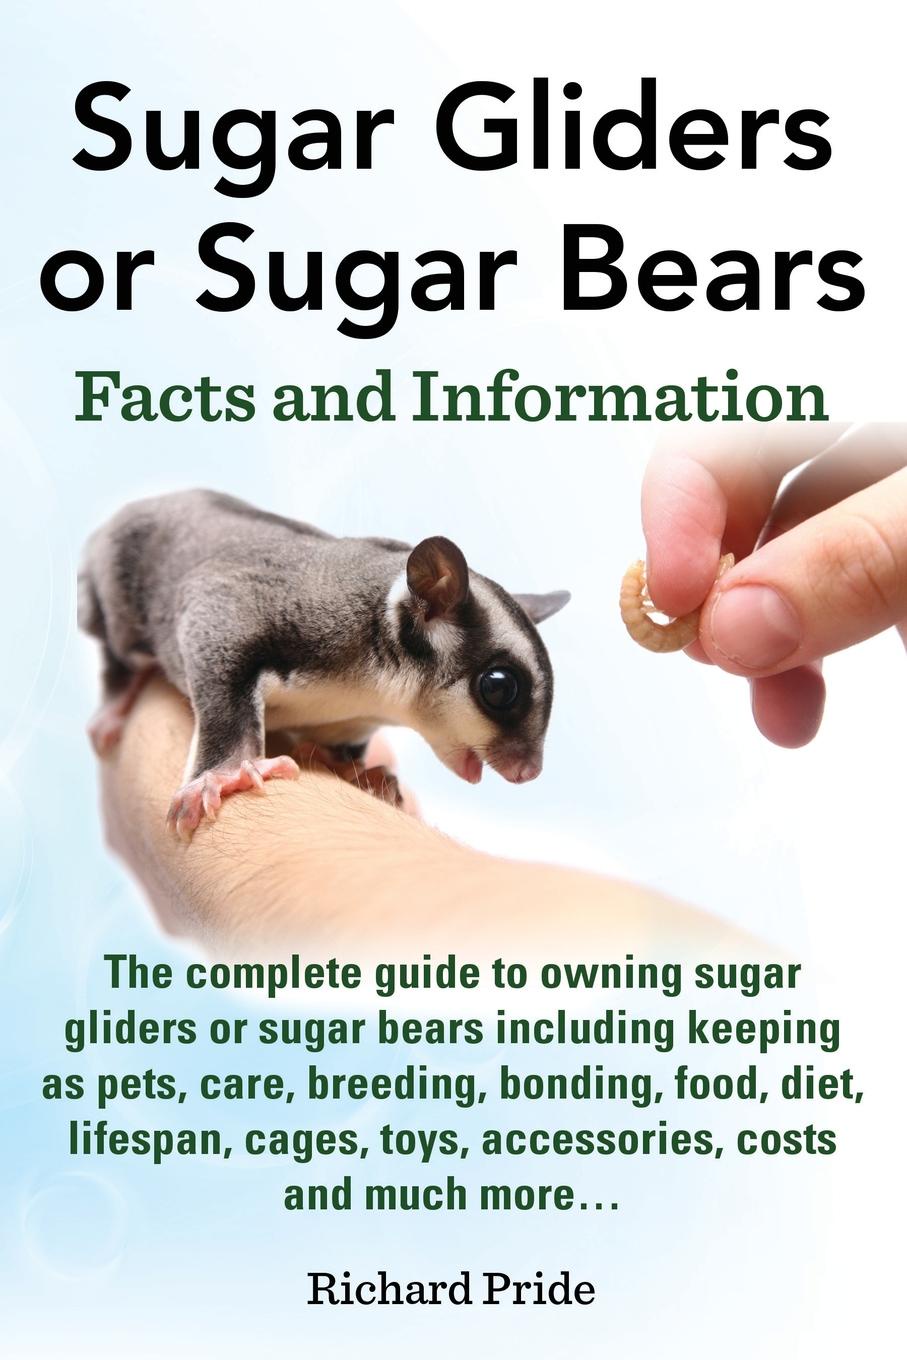 Richard Pride Sugar Gliders or Sugar Bears. Facts and Information on Sugar Gliders as Pets Including Care, Breeding, Bonding, Food, Diet, Lifespan, Cages, Toys, C